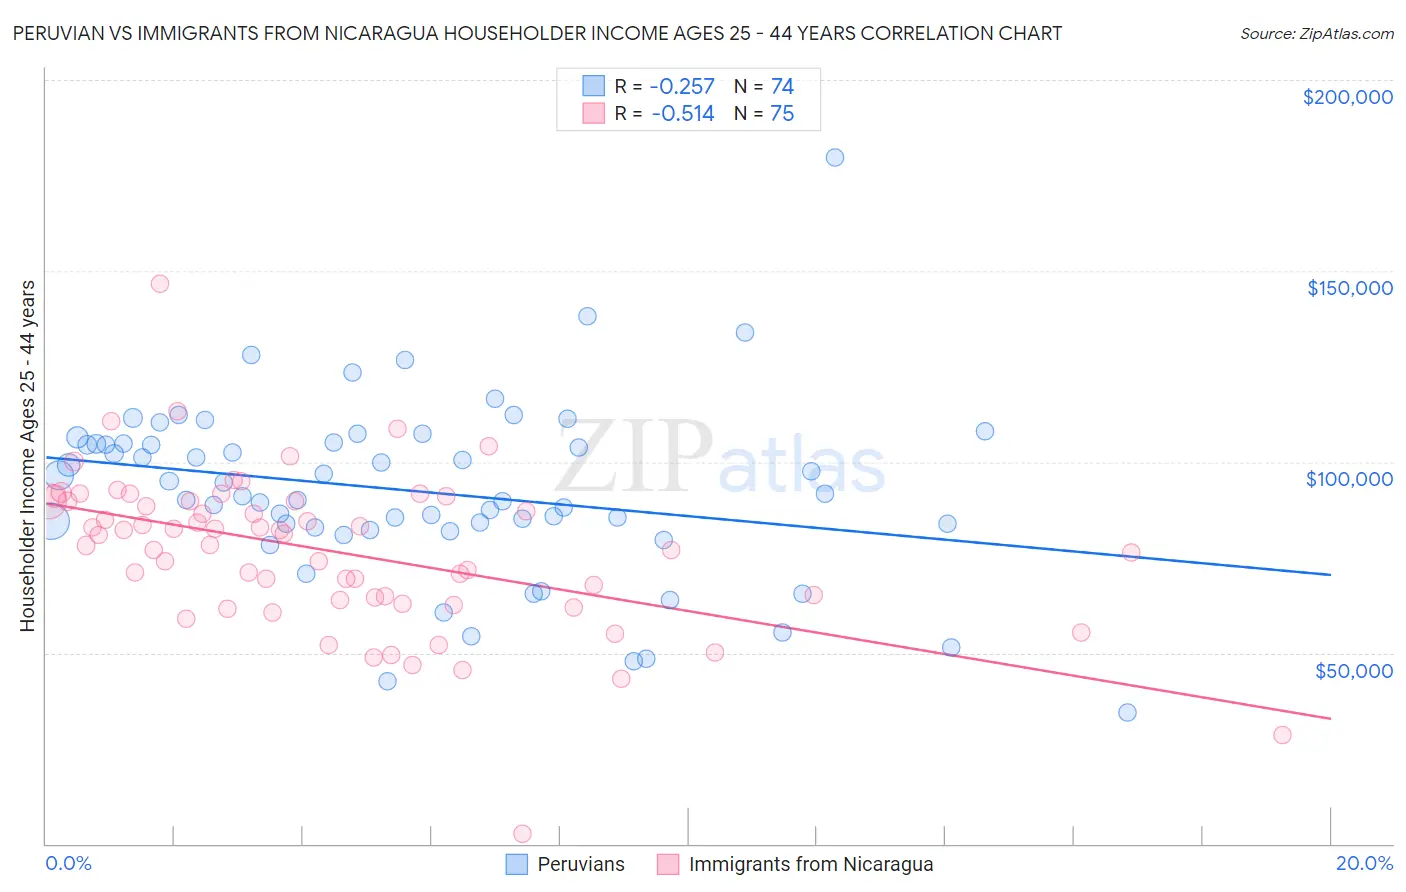 Peruvian vs Immigrants from Nicaragua Householder Income Ages 25 - 44 years